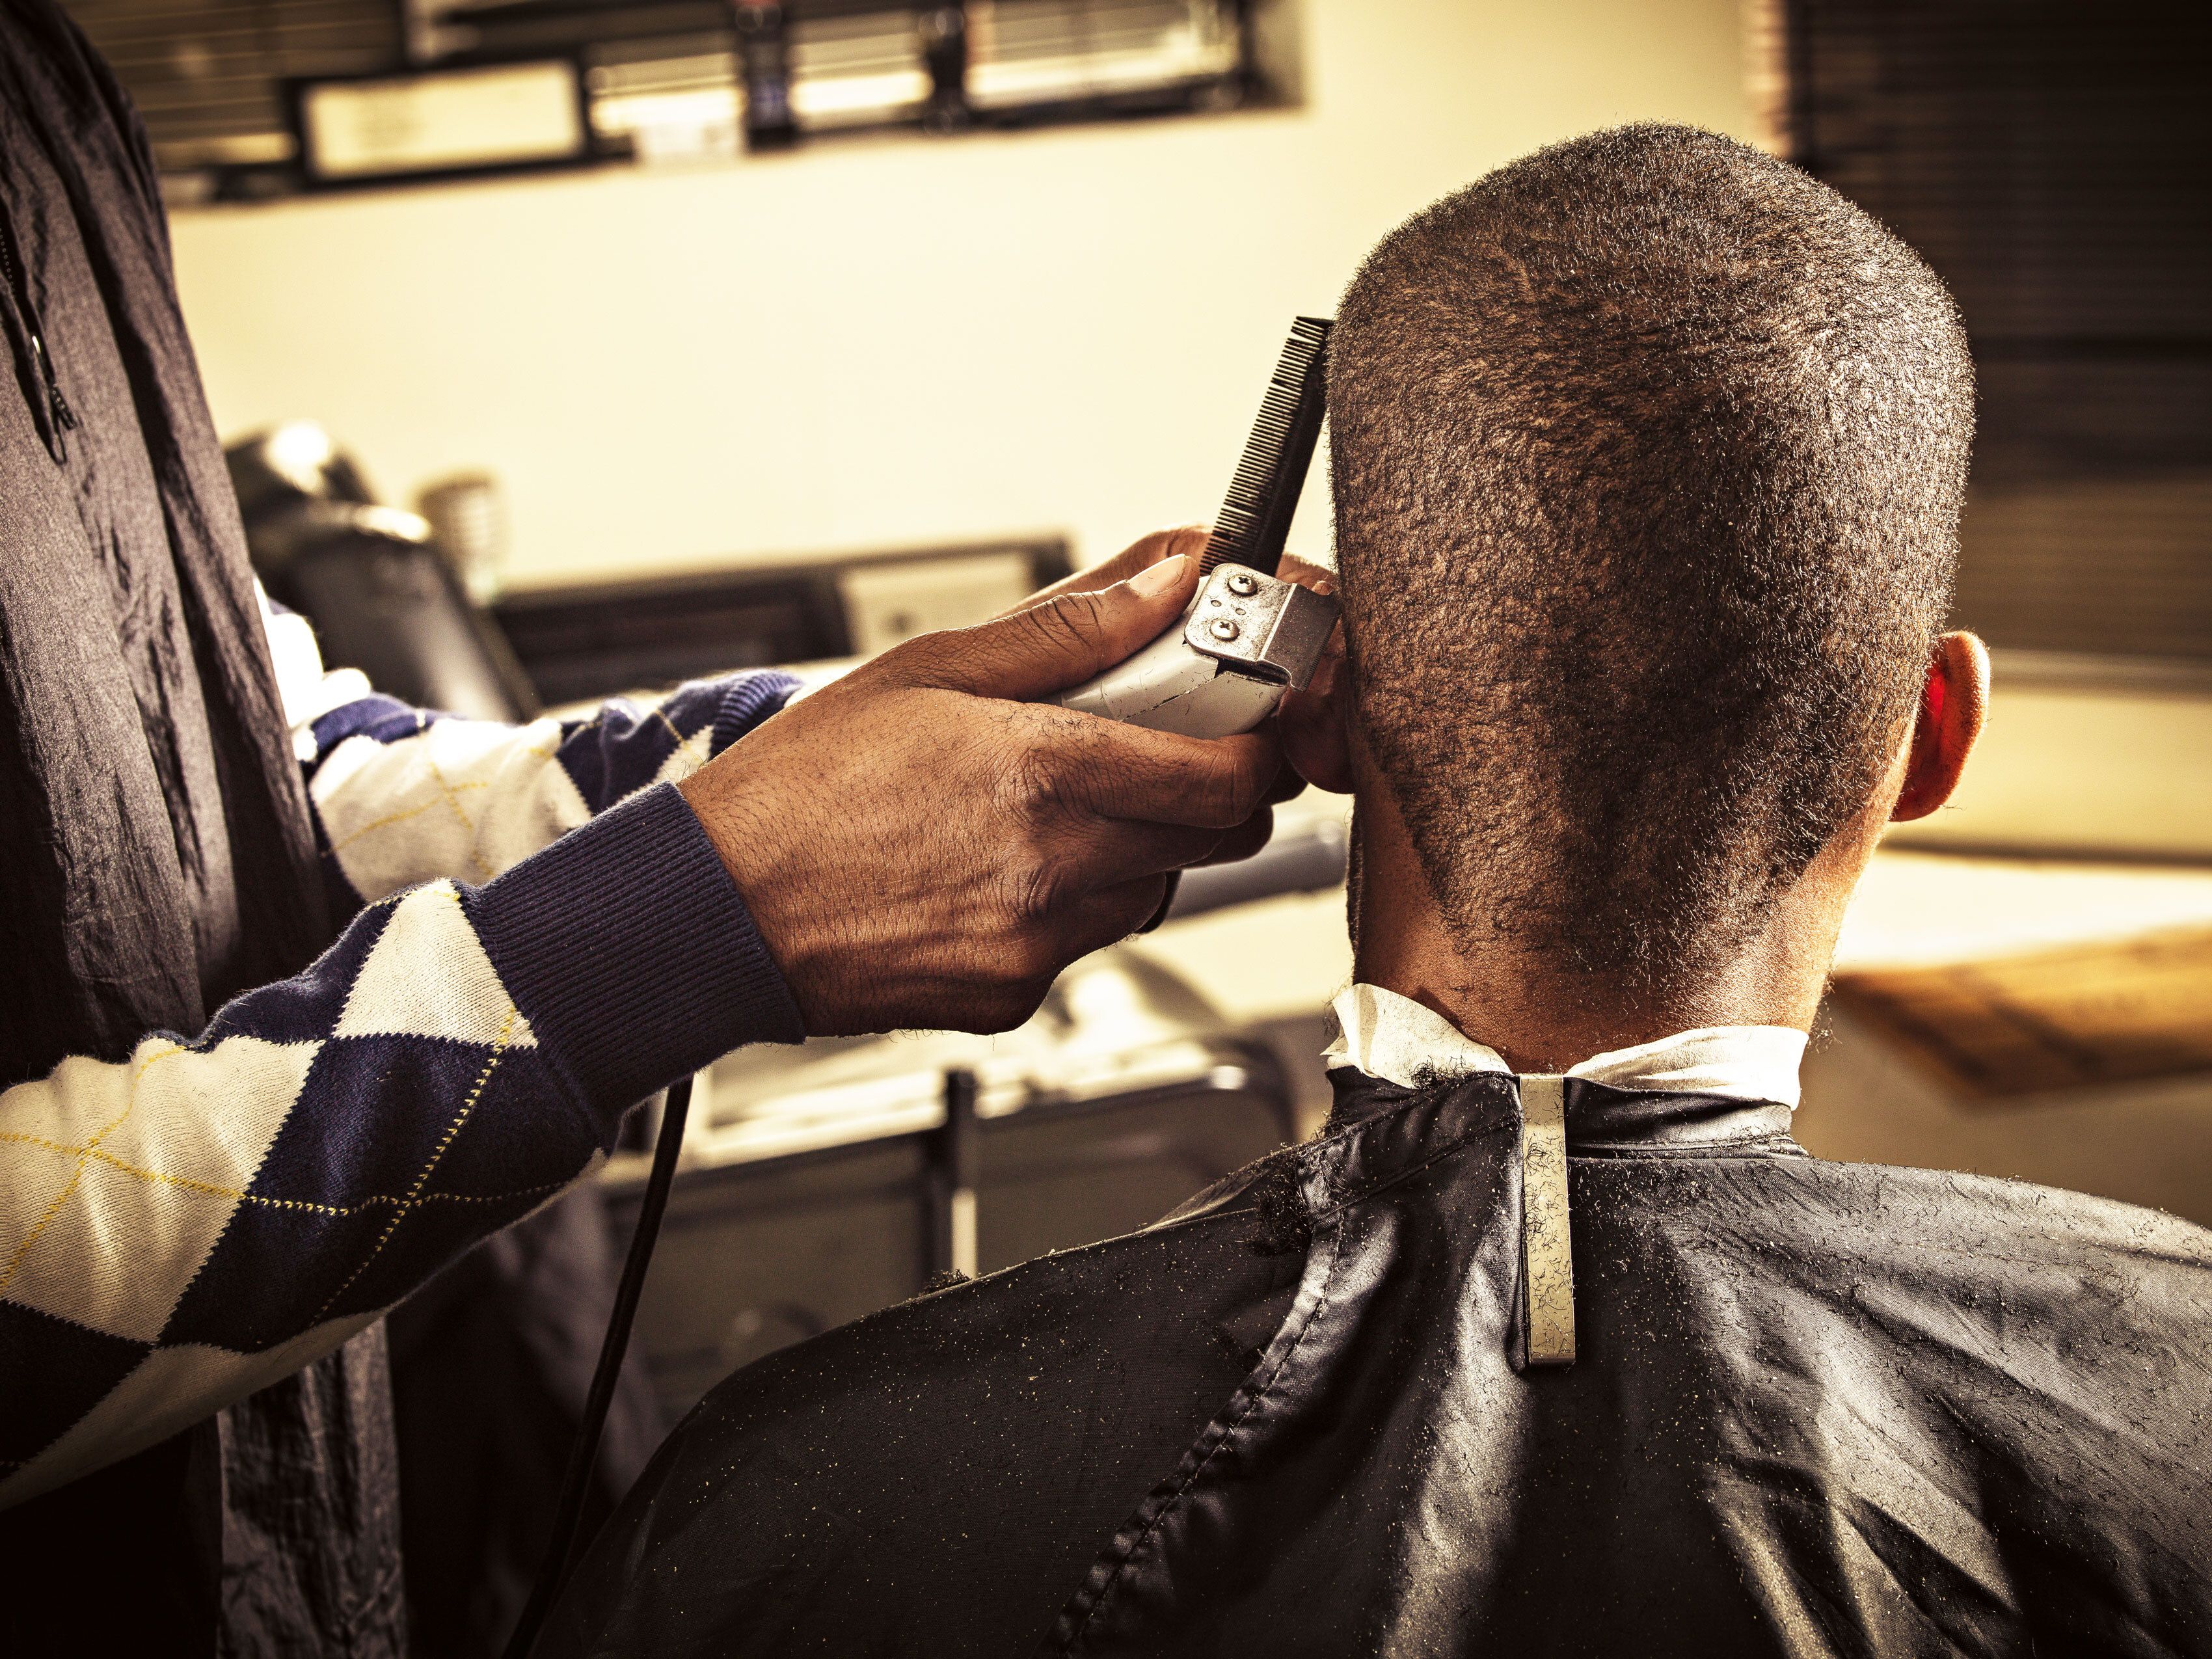 Getting Your Hair Cut After the Pandemic - Barber Shop Safety